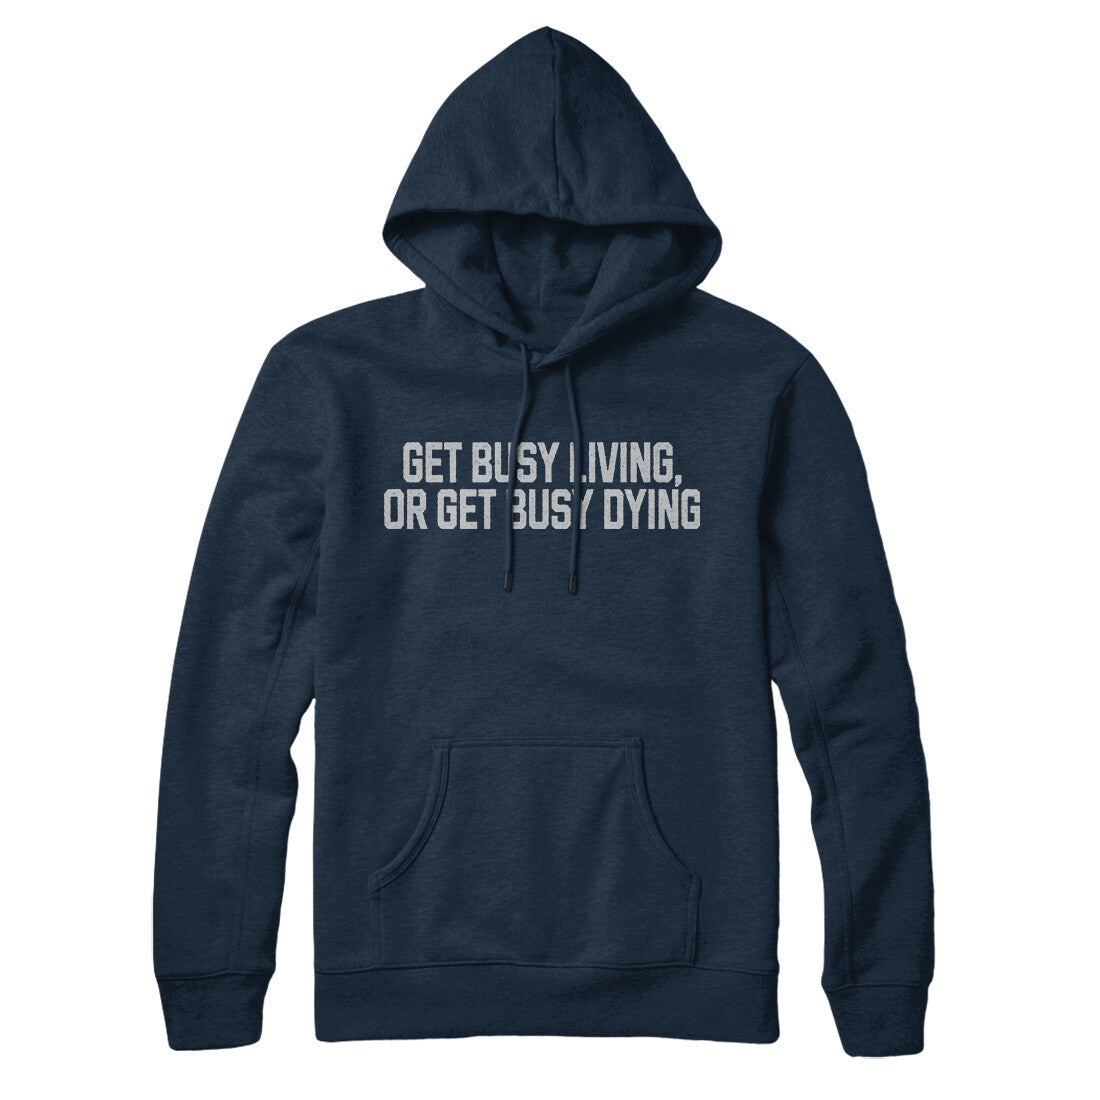 Get Busy Living or Get Busy Dying in Navy Blue Color